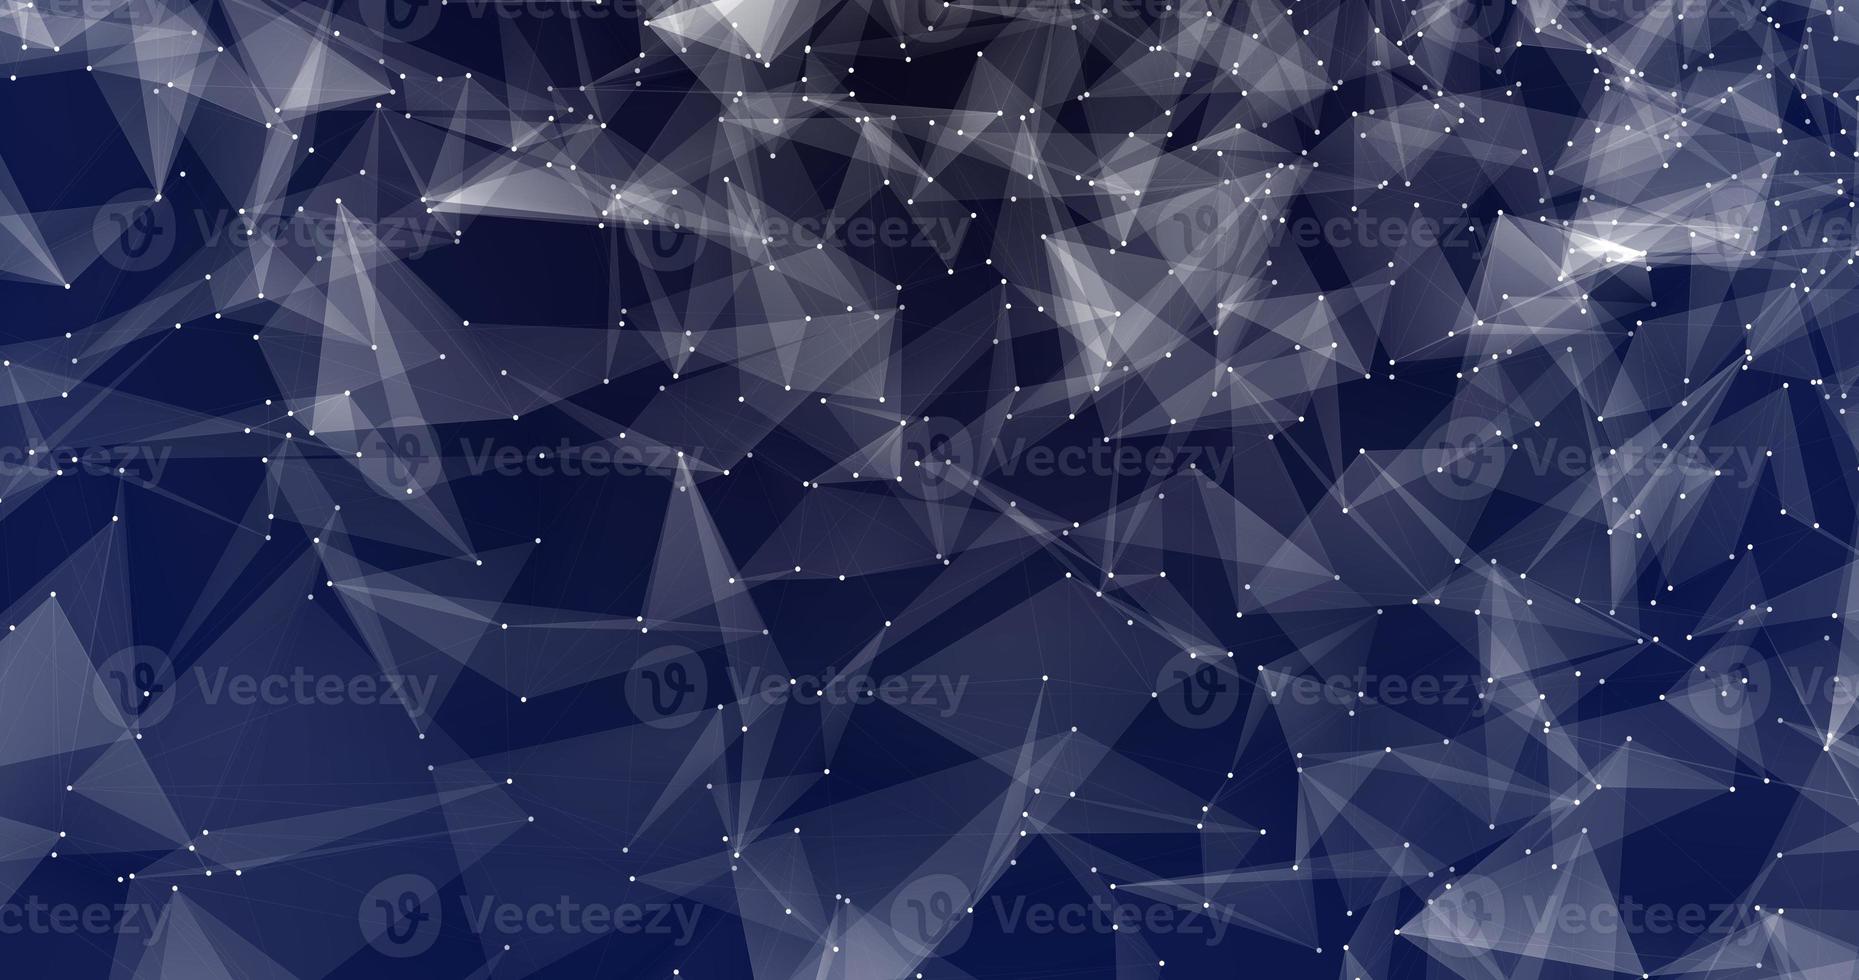 Abstract background of shiny blue glass triangles with lines and dots hi-tech digital triangulation. Screensaver beautiful photo